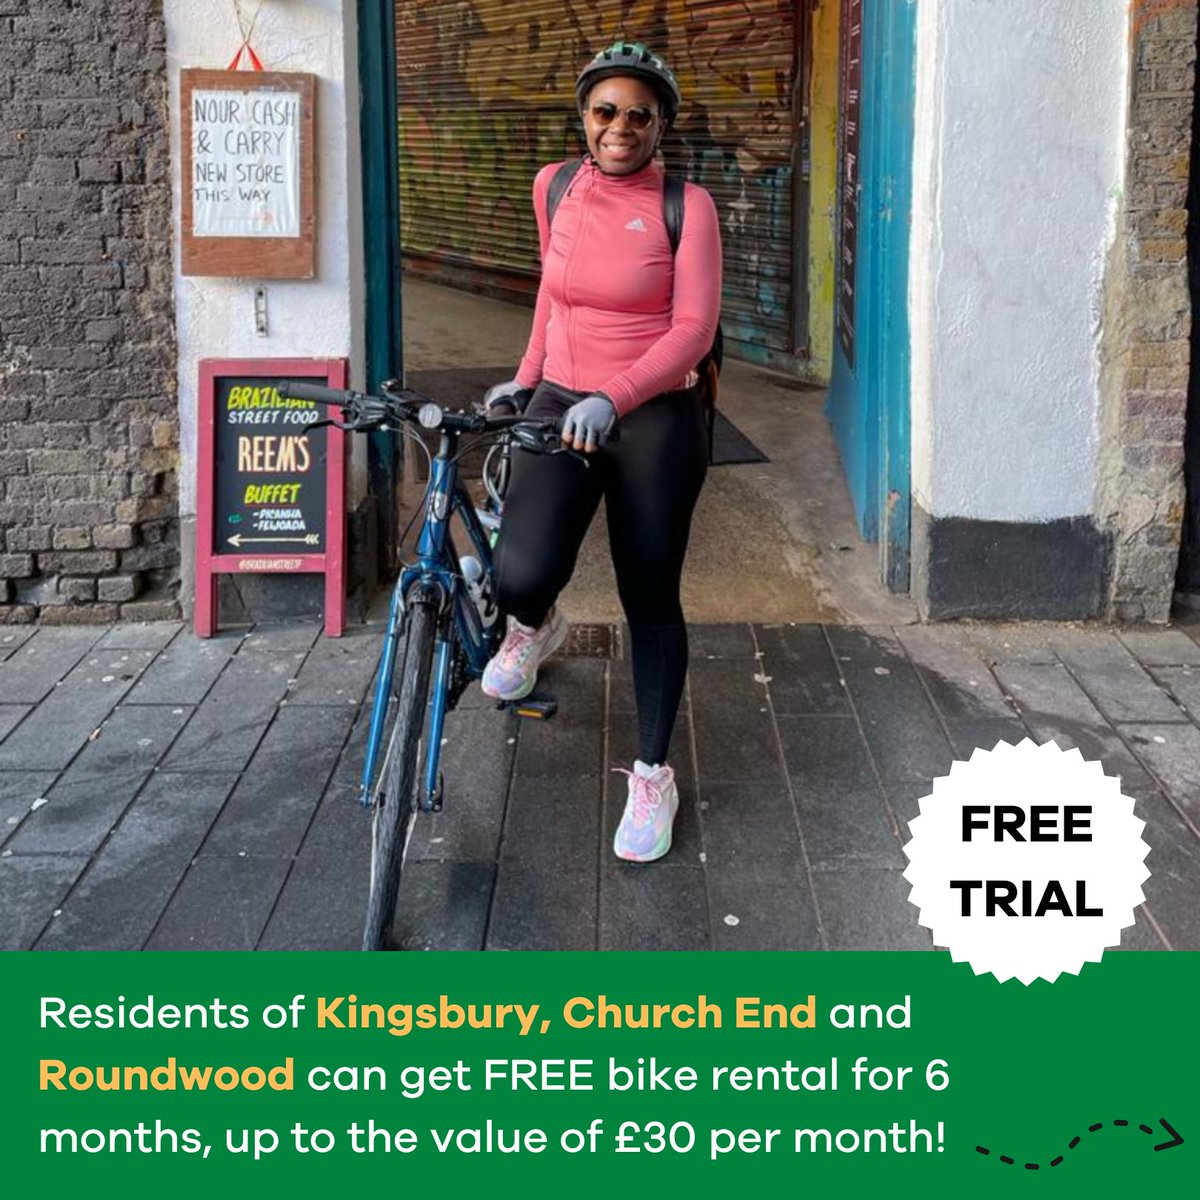 Meet Liliane - one of our Cycle Influencers Brent residents like Liliane from one of the Green Neighbourhoods- Kingsbury, Church End or Roundwood can get a FREE bike for 6 months, through the Try Before You Bike scheme. Use code: togethertowardszero peddlemywheels.com